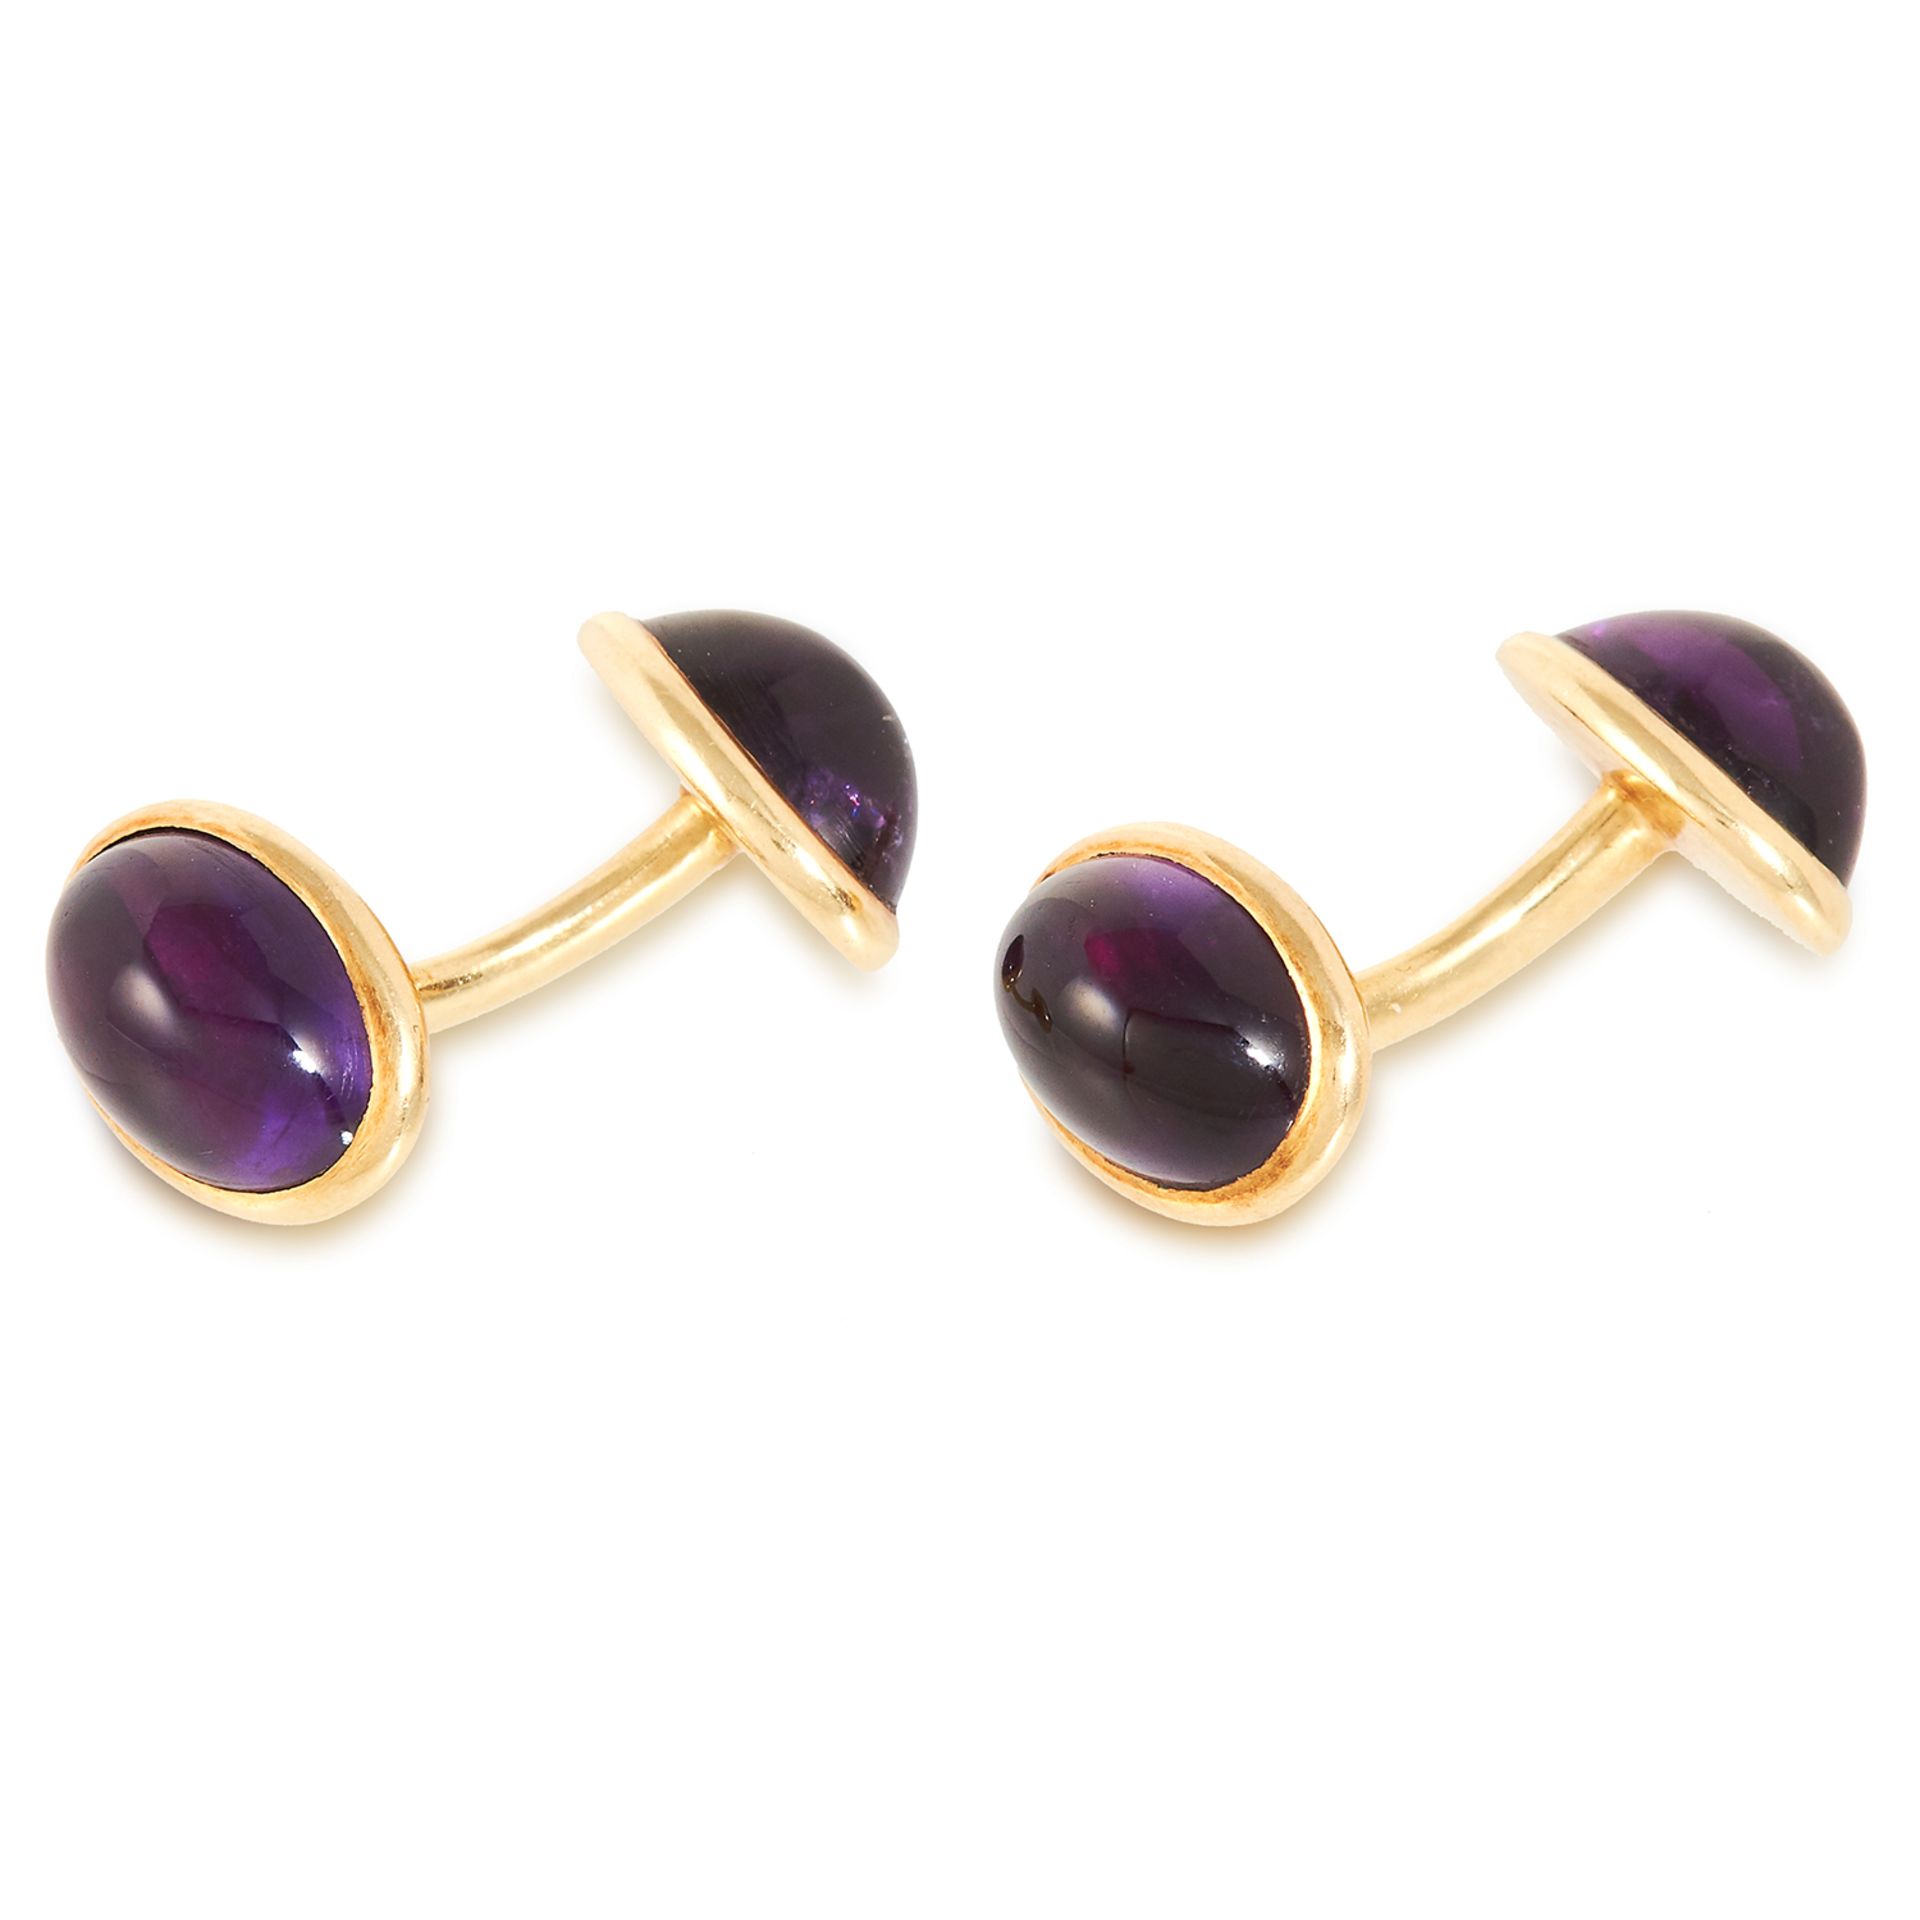 A PAIR OF AMETHYST CUFFLINKS in 18ct yellow gold, set at either end with an oval cabochon